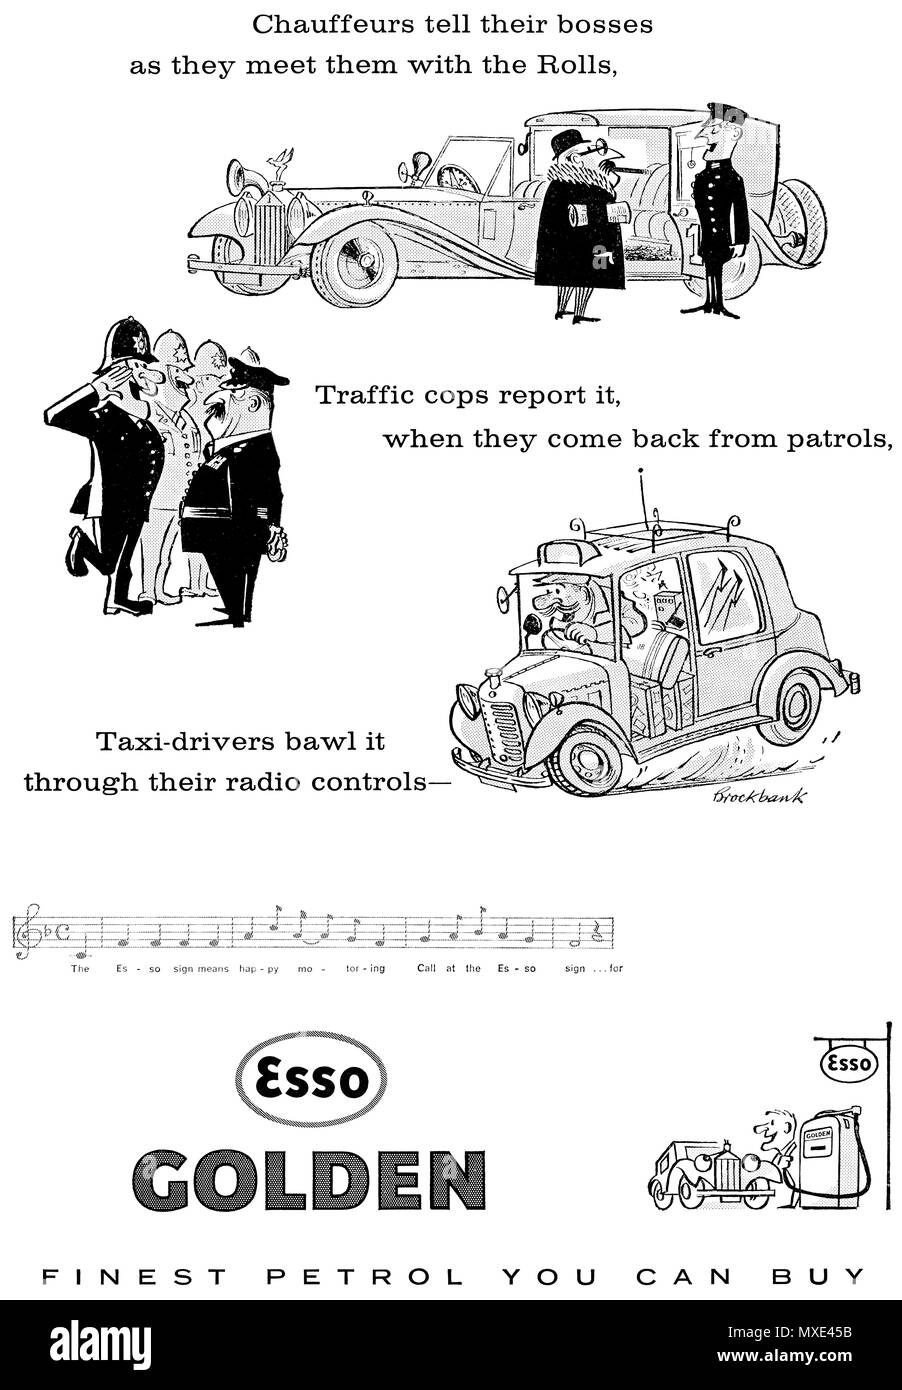 1962 British advertisement for Esso Gold petrol, illustrated with cartoons by Brockbank. Stock Photo